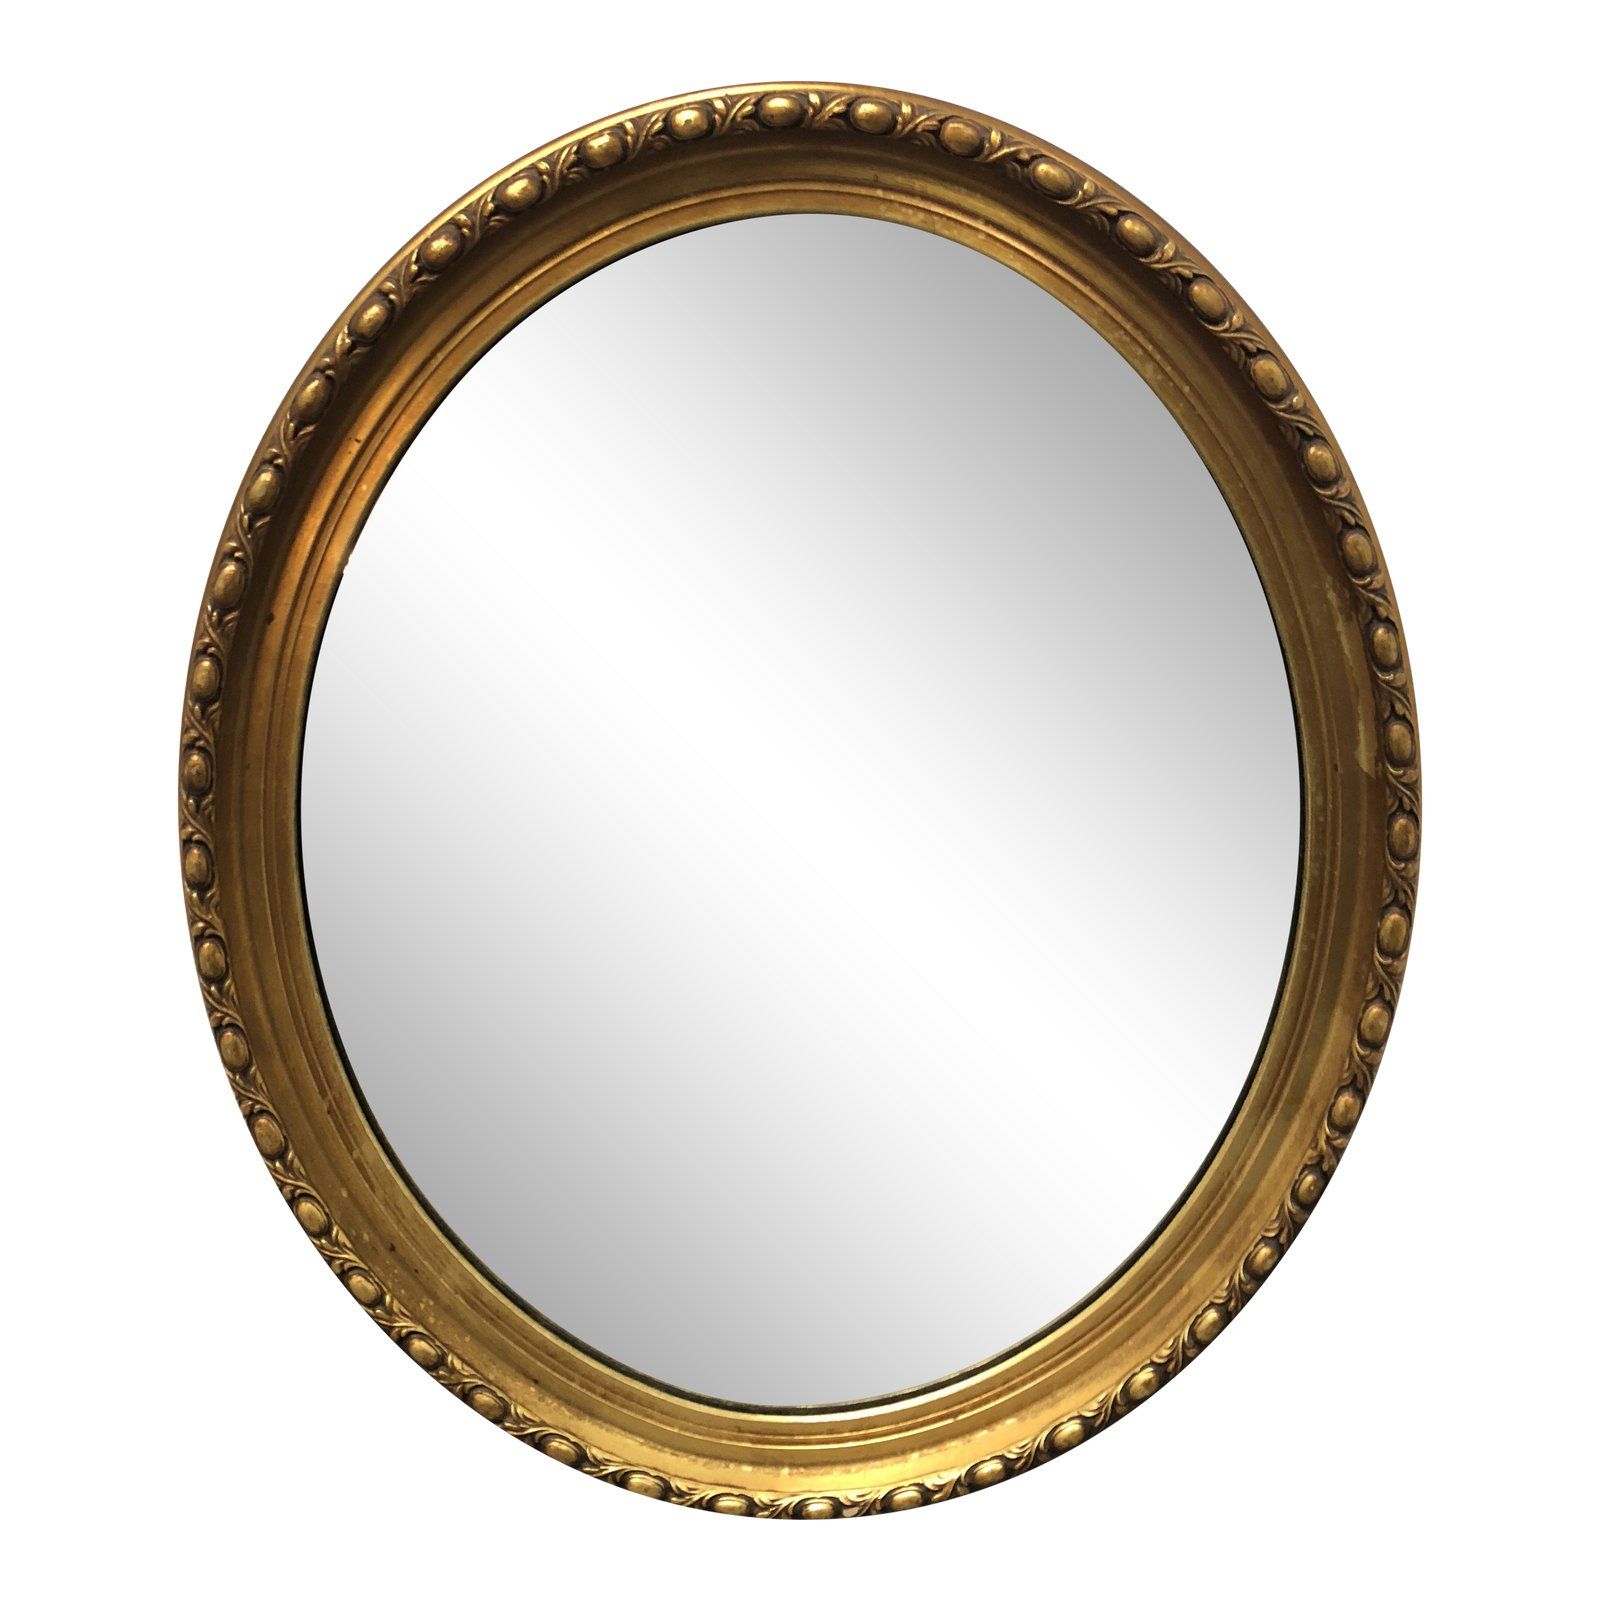 Vintage Round Gold Finish Wall Mirror | Design Plus Gallery Intended For Gold Rounded Corner Wall Mirrors (View 13 of 15)